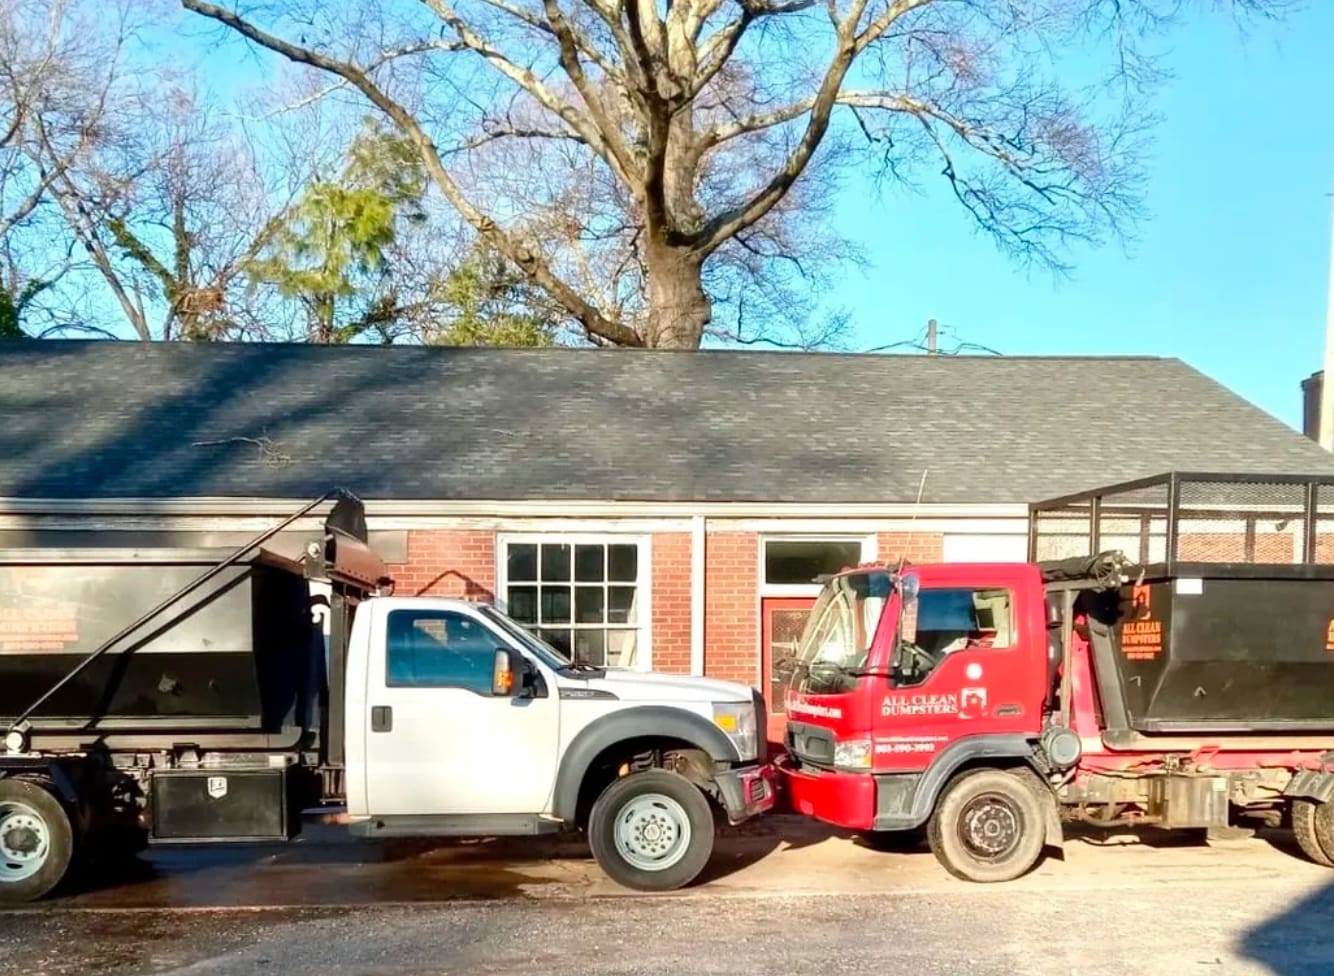 A truck is parked in front of a house.